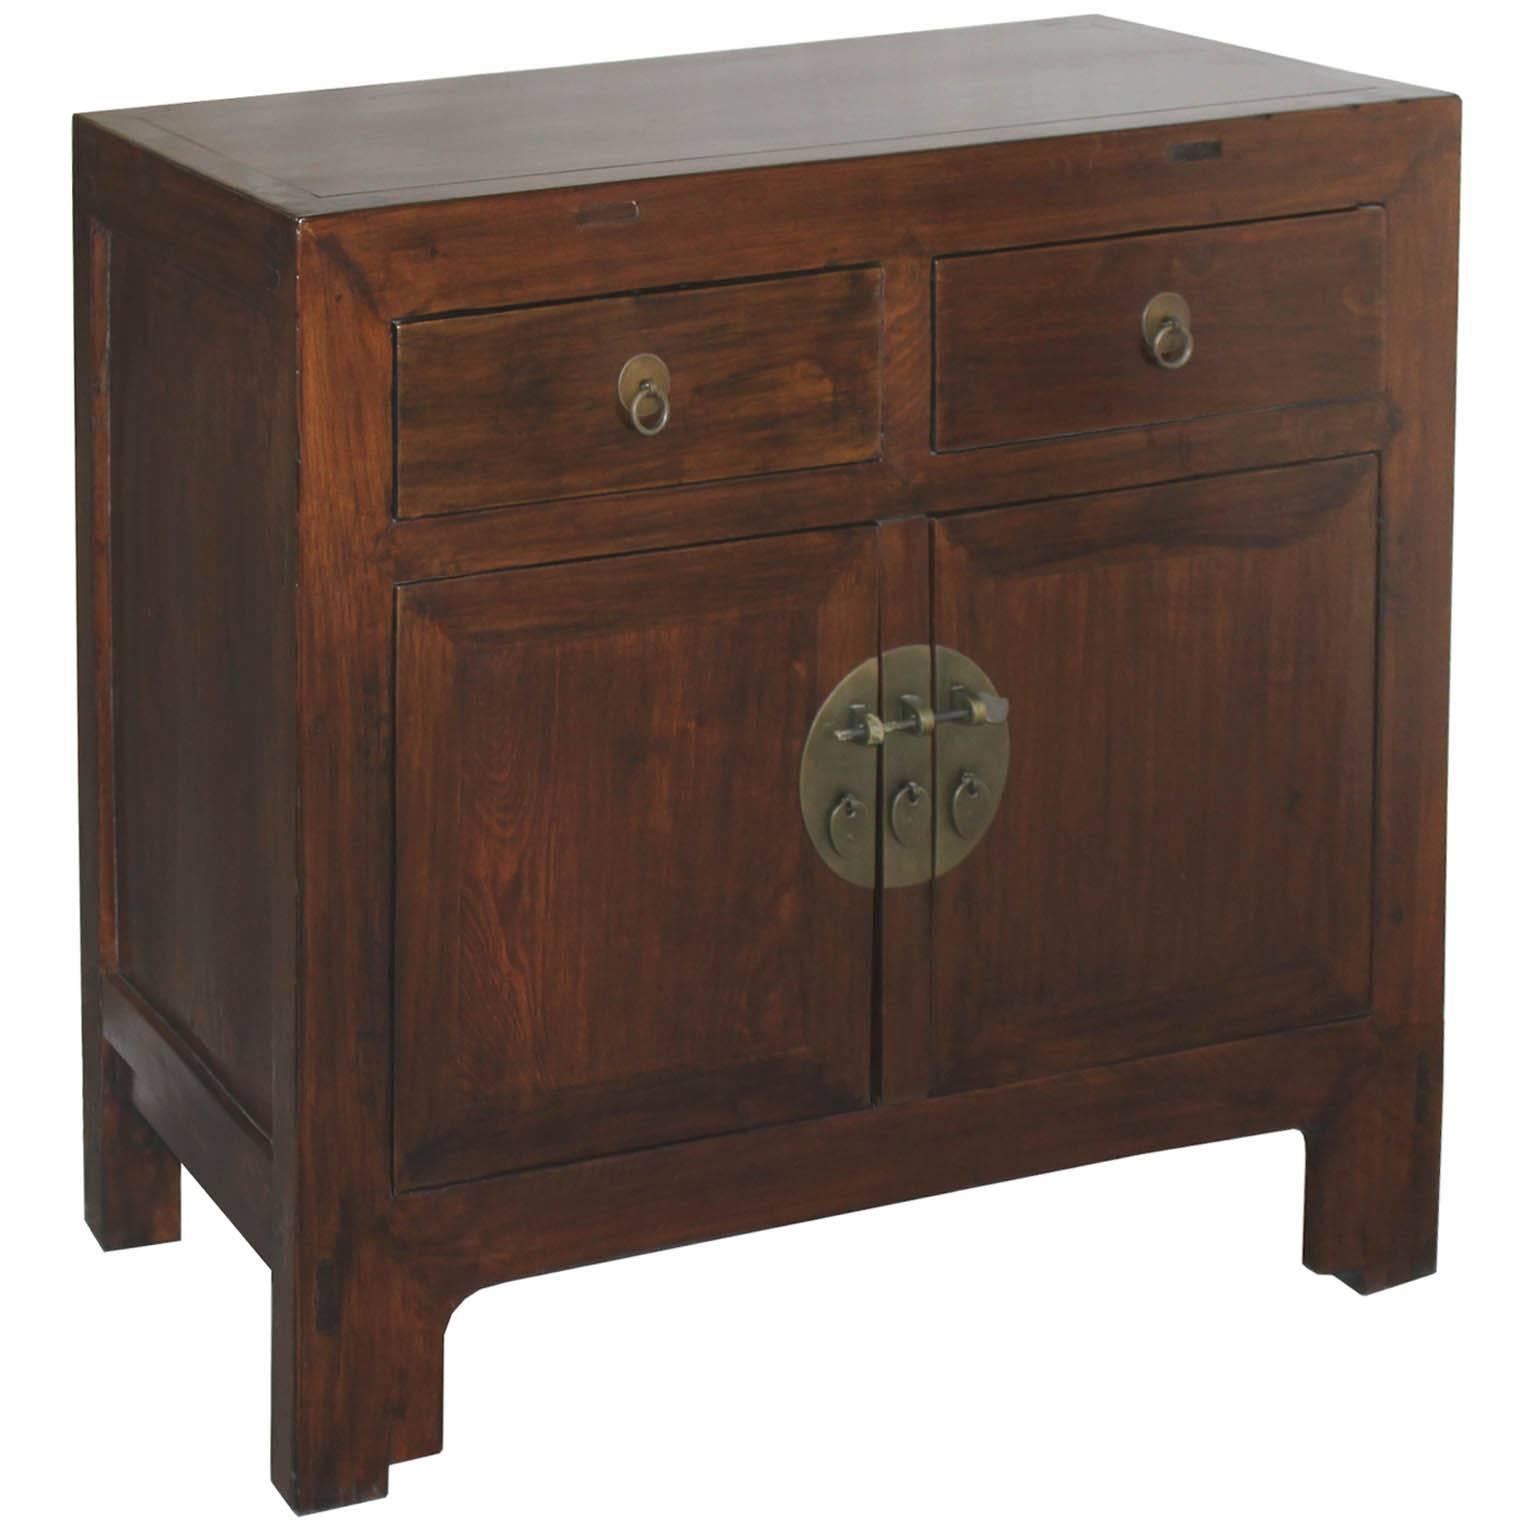 Two-door elm side chest with straight bottom skirt. New hardware, Beijing, China, circa 1900. Some wear.